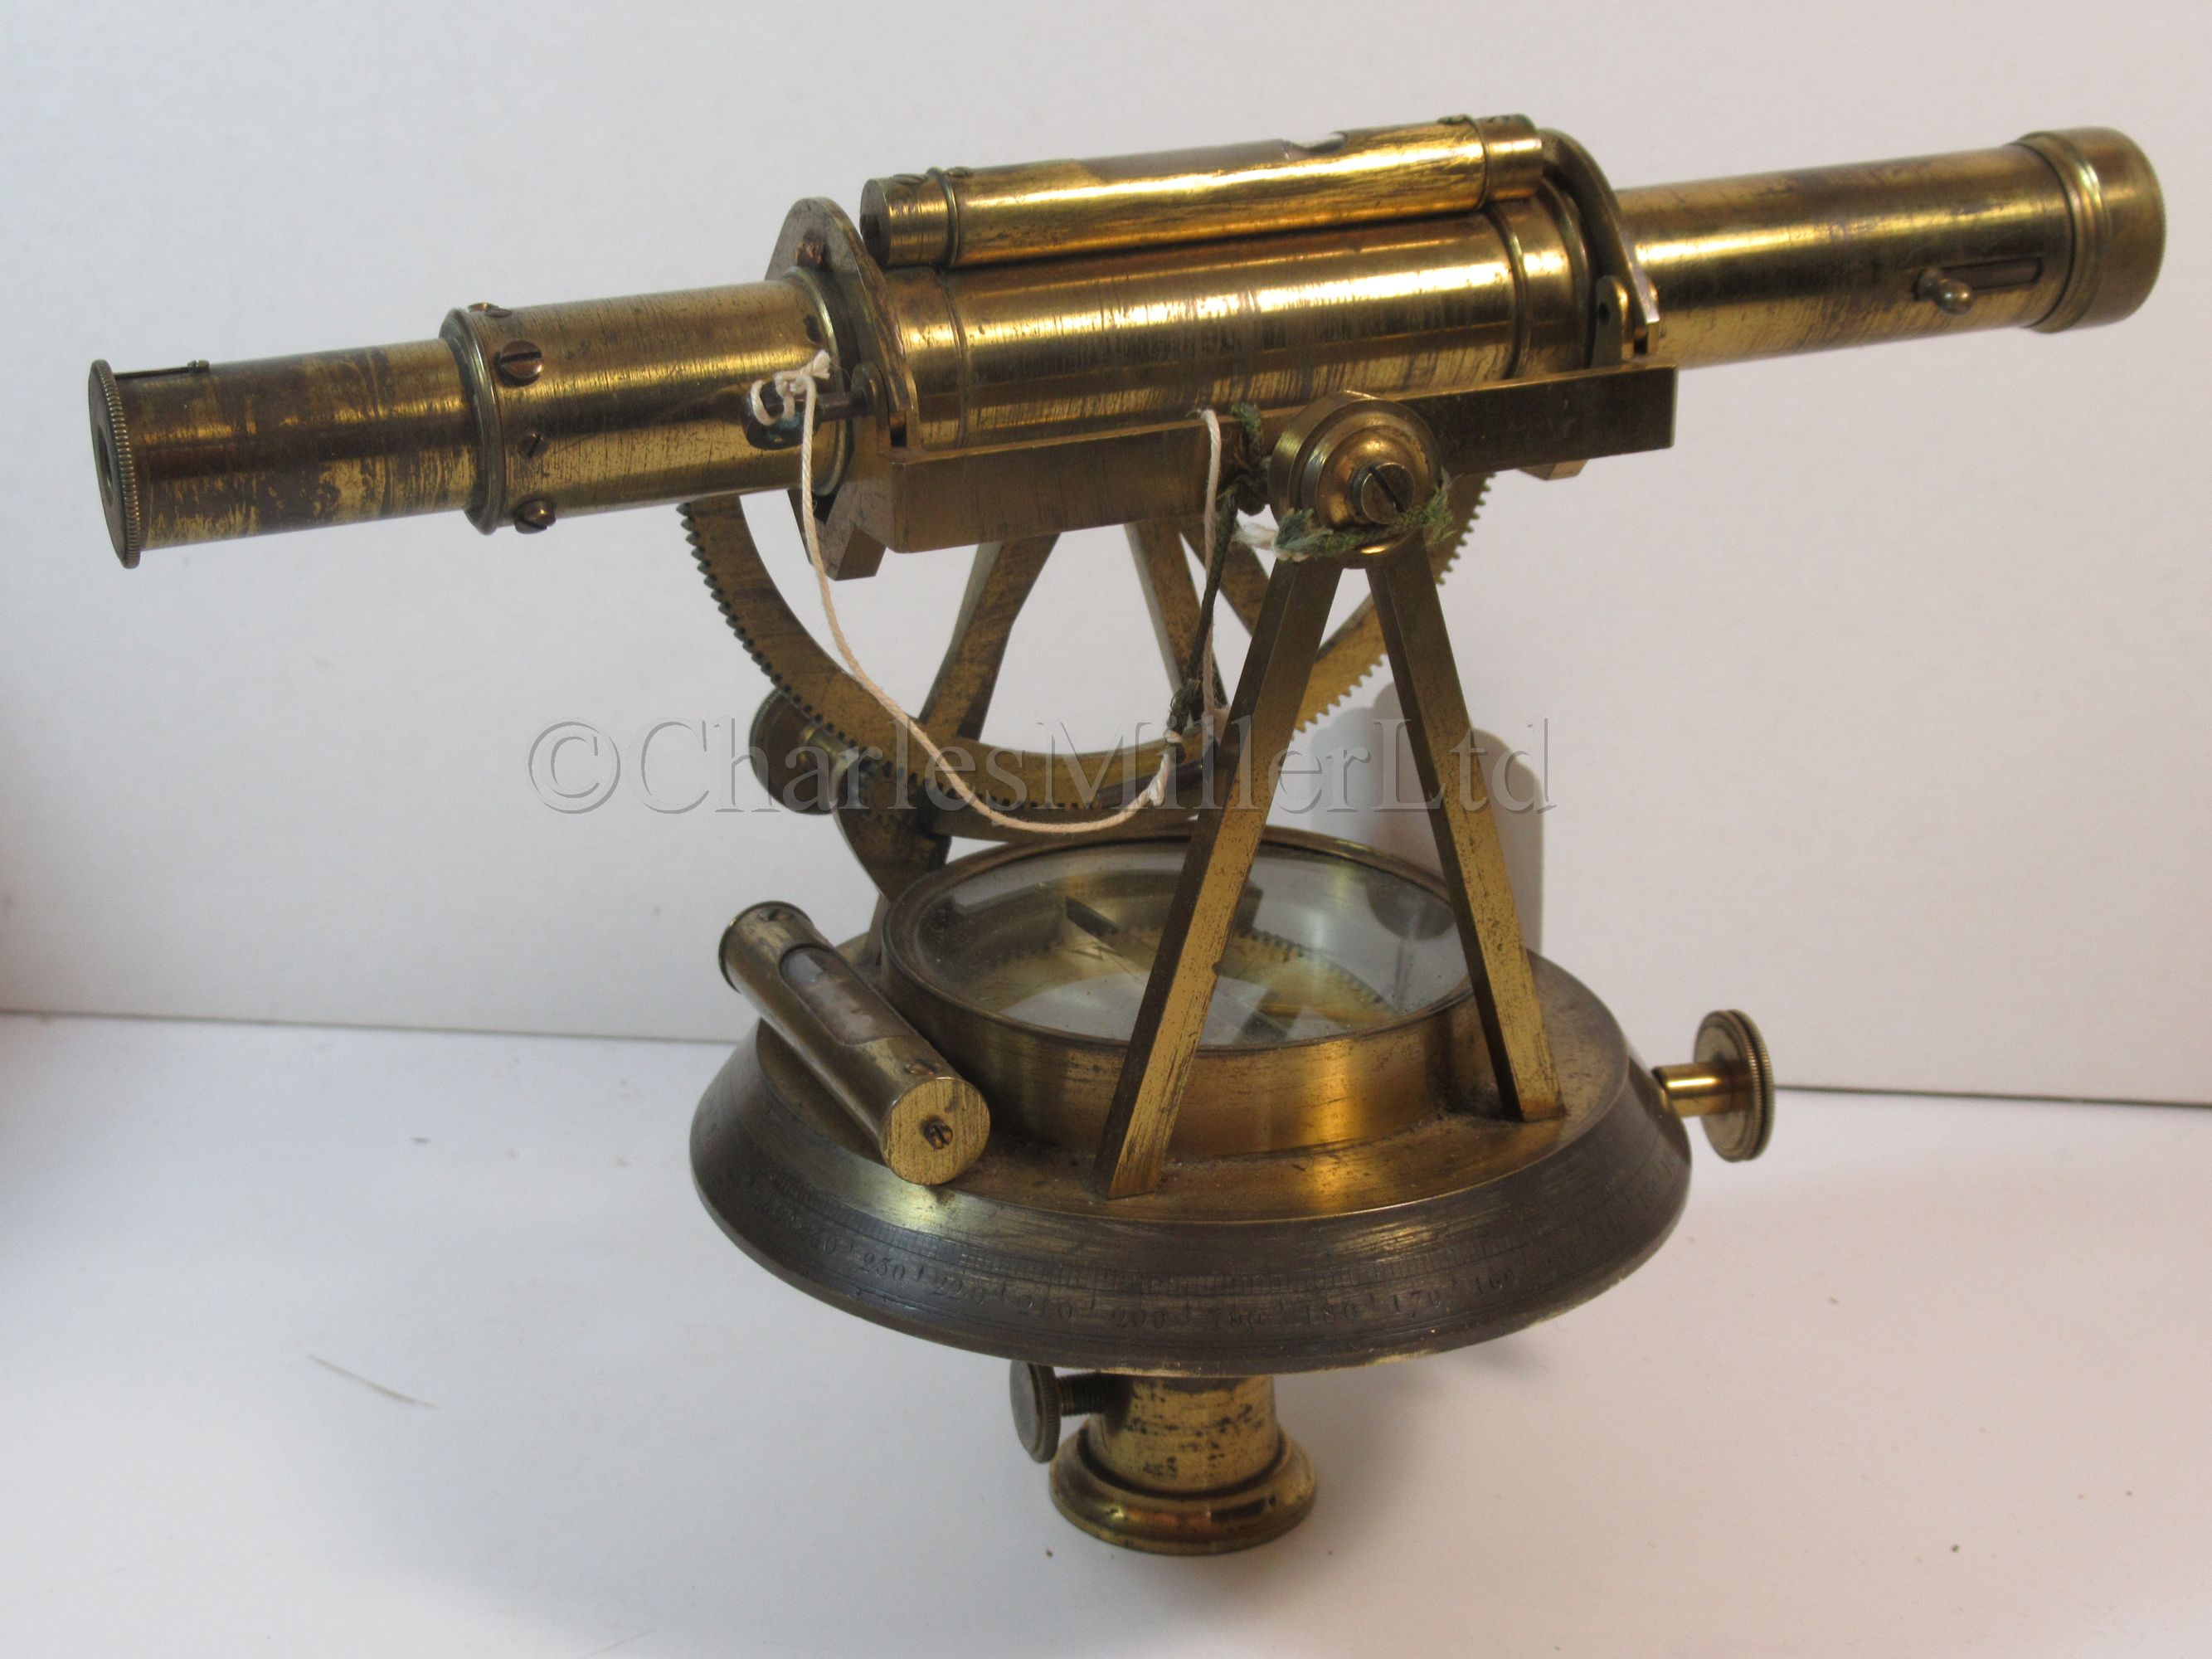 AN EARLY 19TH CENTURY THEODOLITE BY JOHN CORLESS, LONDON, CIRCA 1815 - Image 13 of 14